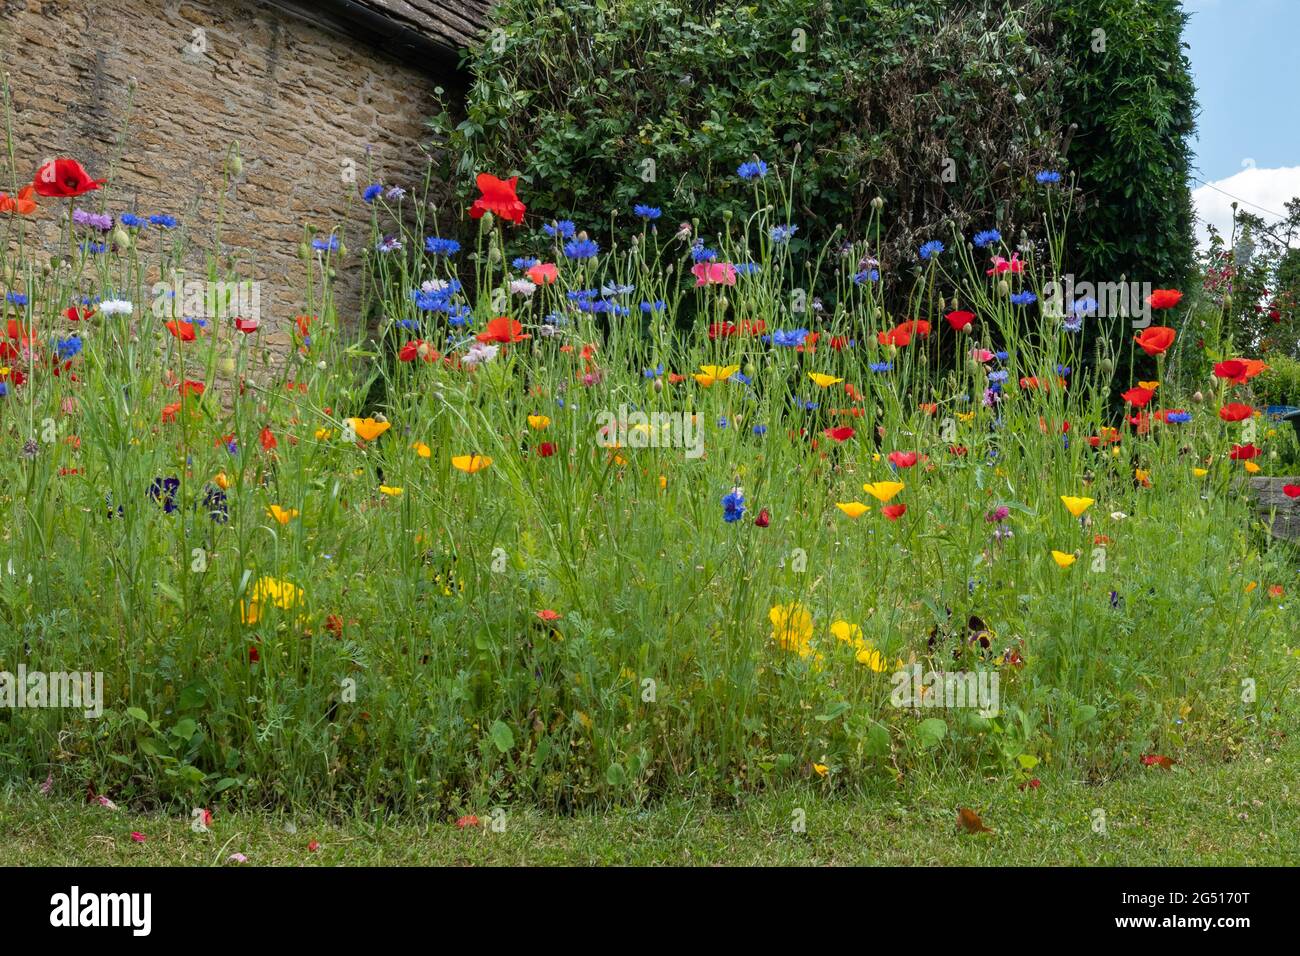 Colourful wildflower garden with red poppies and blue cornflowers during summer, England, UK Stock Photo